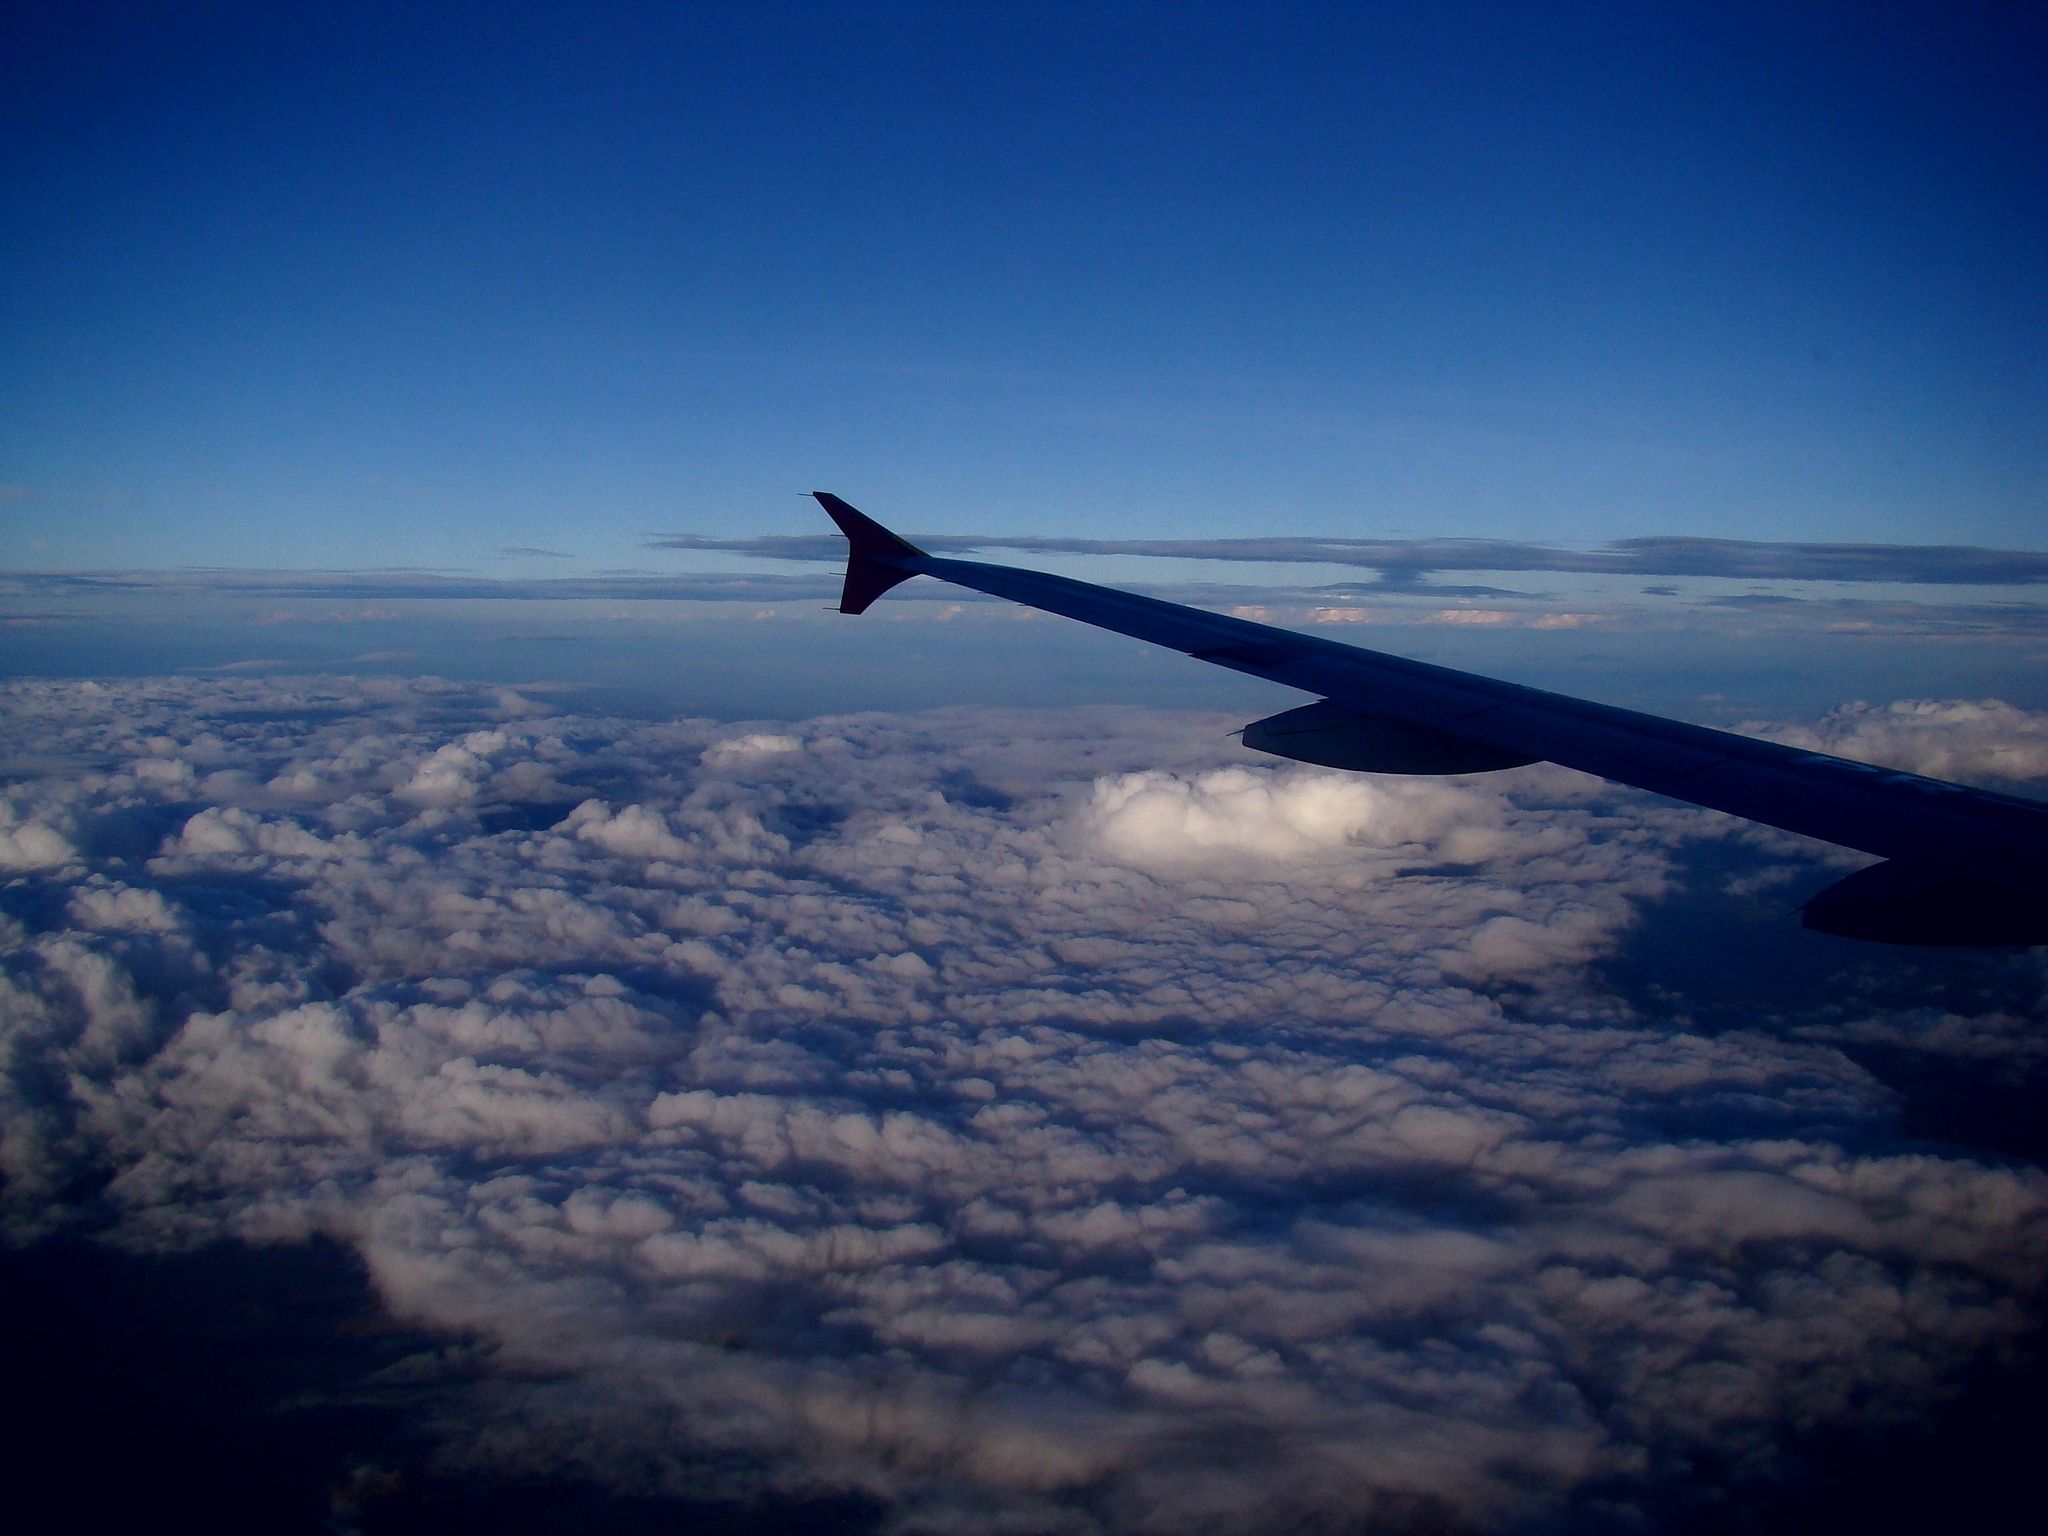 a view of the wing and part of a plane in the air above the clouds